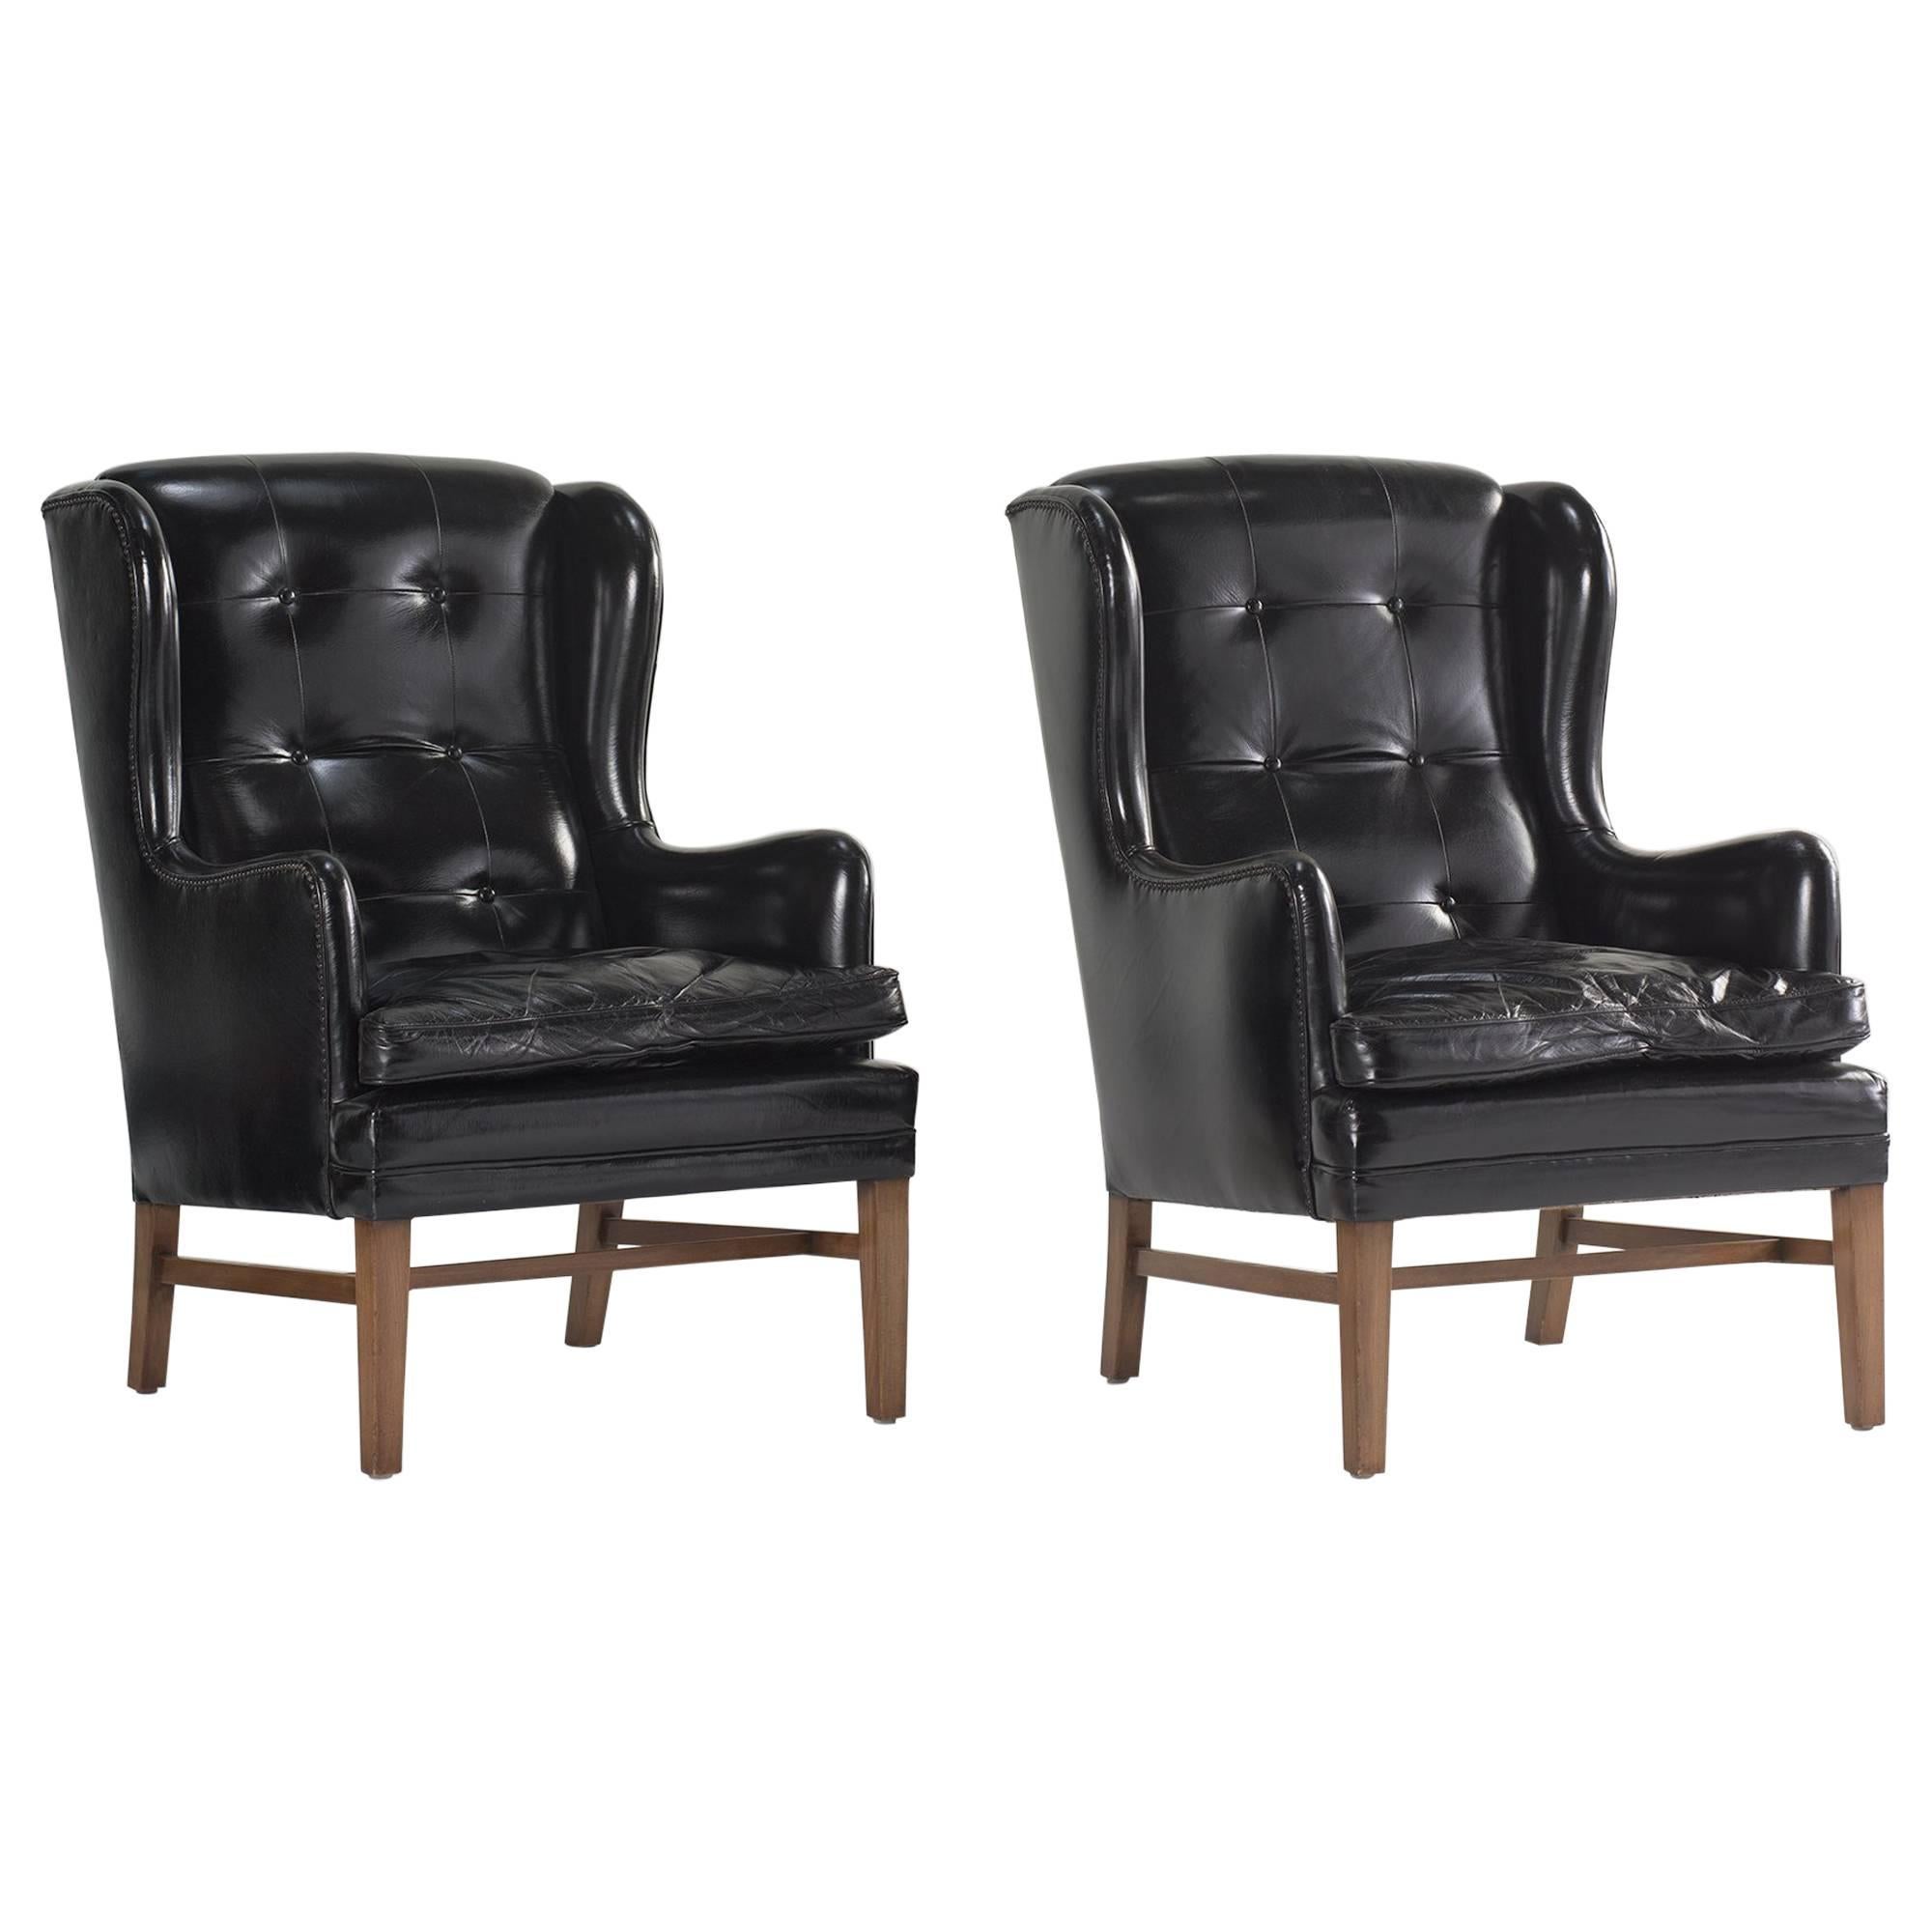 Black Leather Wing Armchairs, Sweden, circa 1950